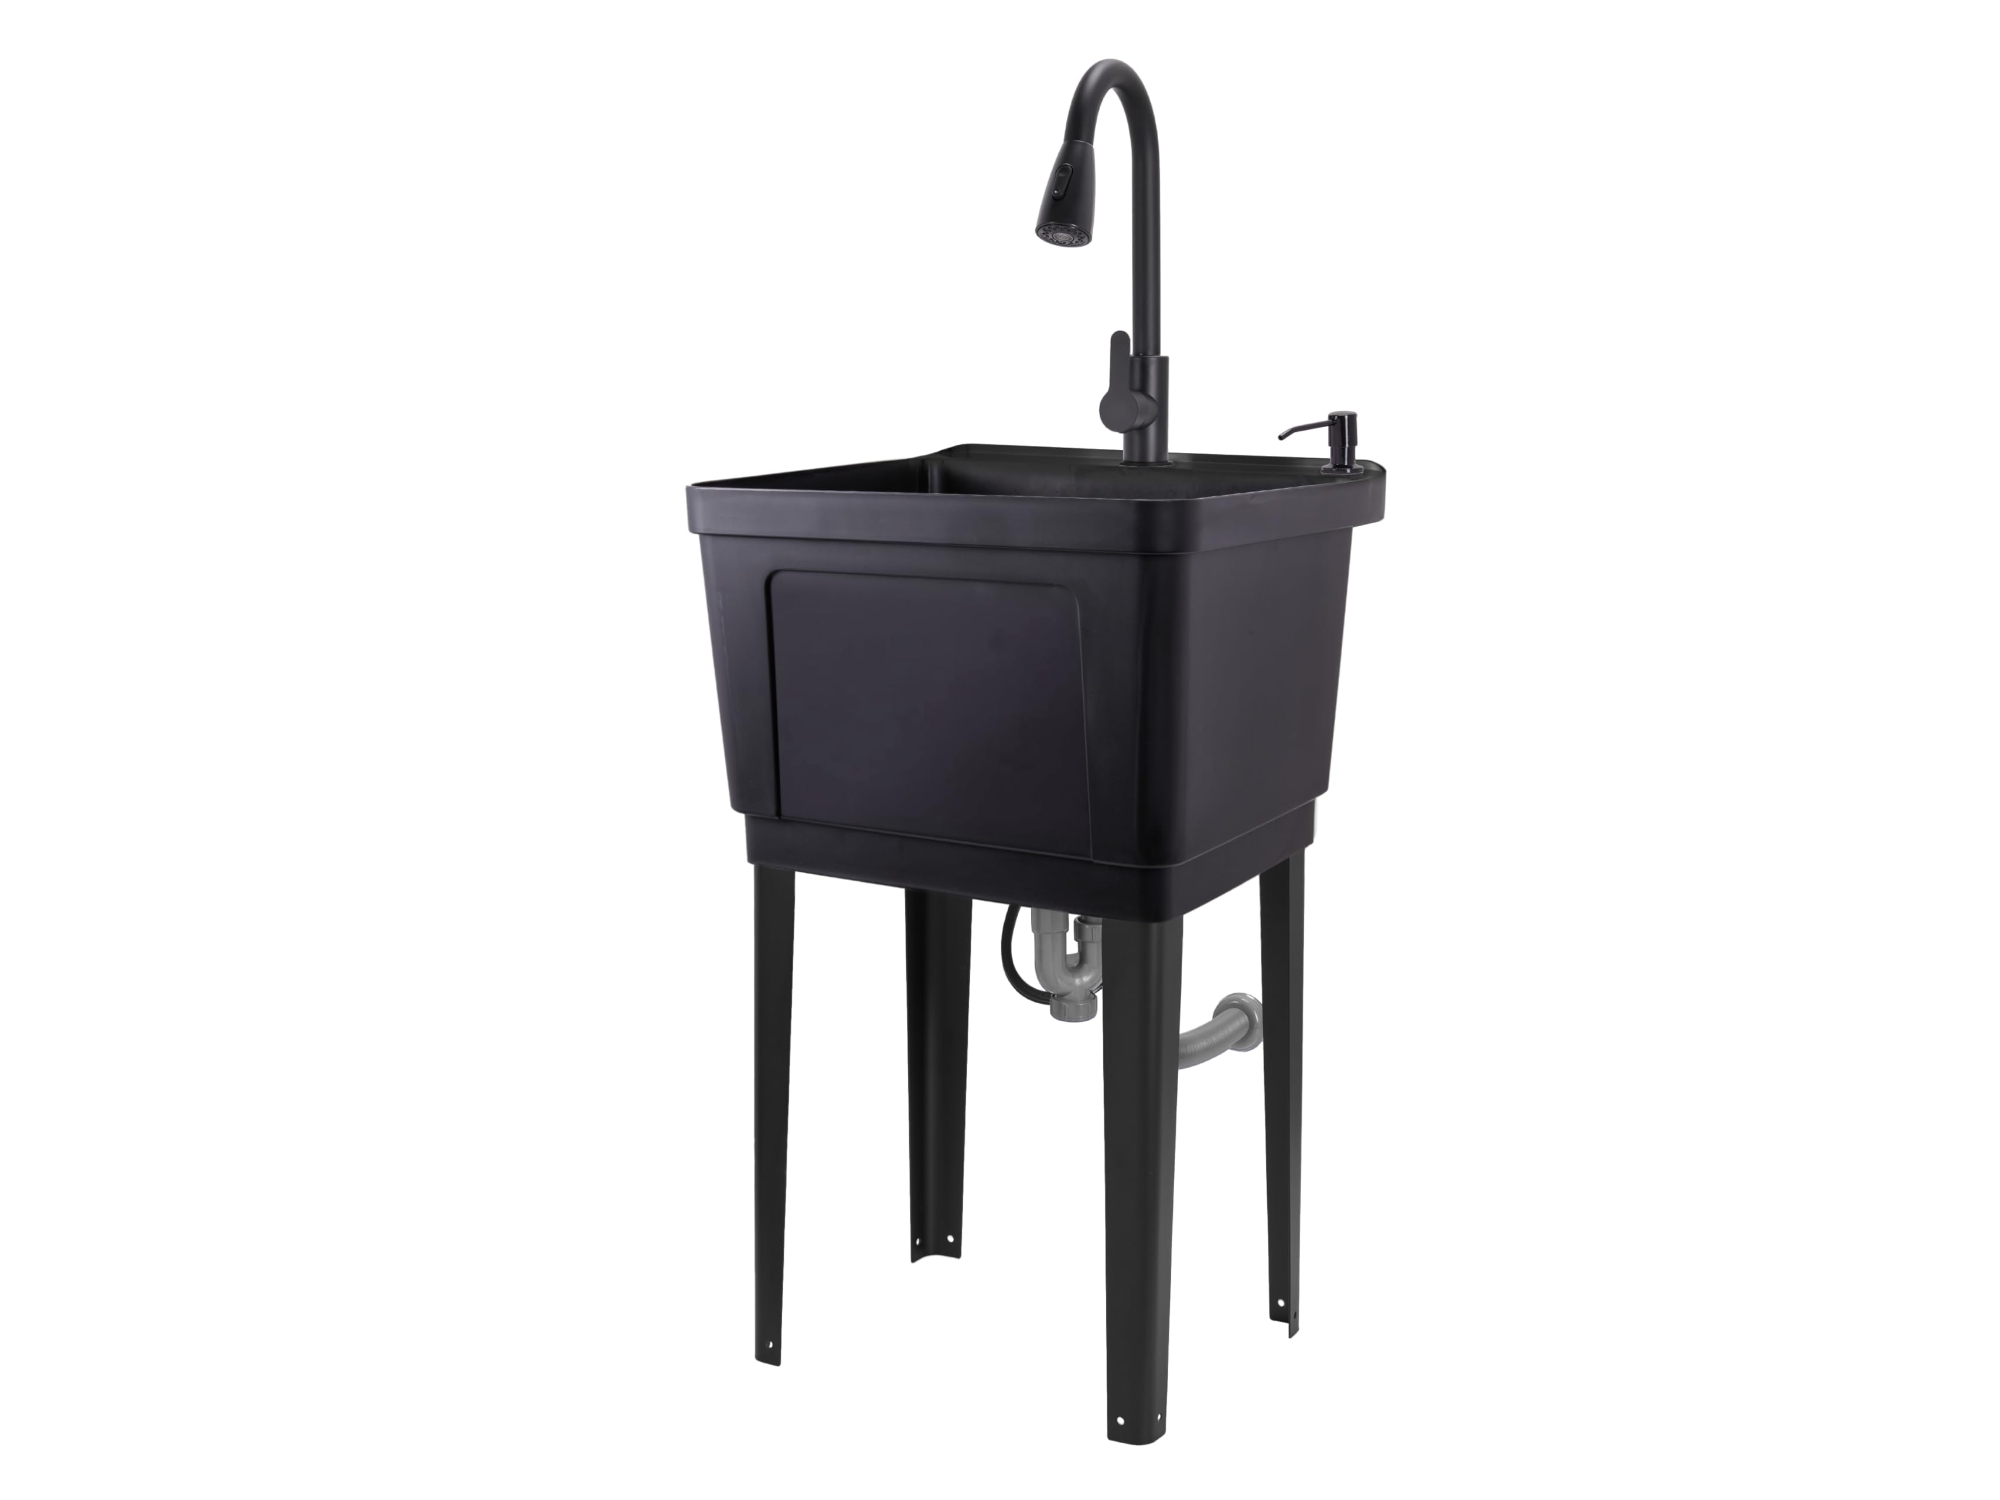 Image of Jumbl Freestanding Utility Sink with Pull-Down Faucet Iron Legs Black ID 843812182256